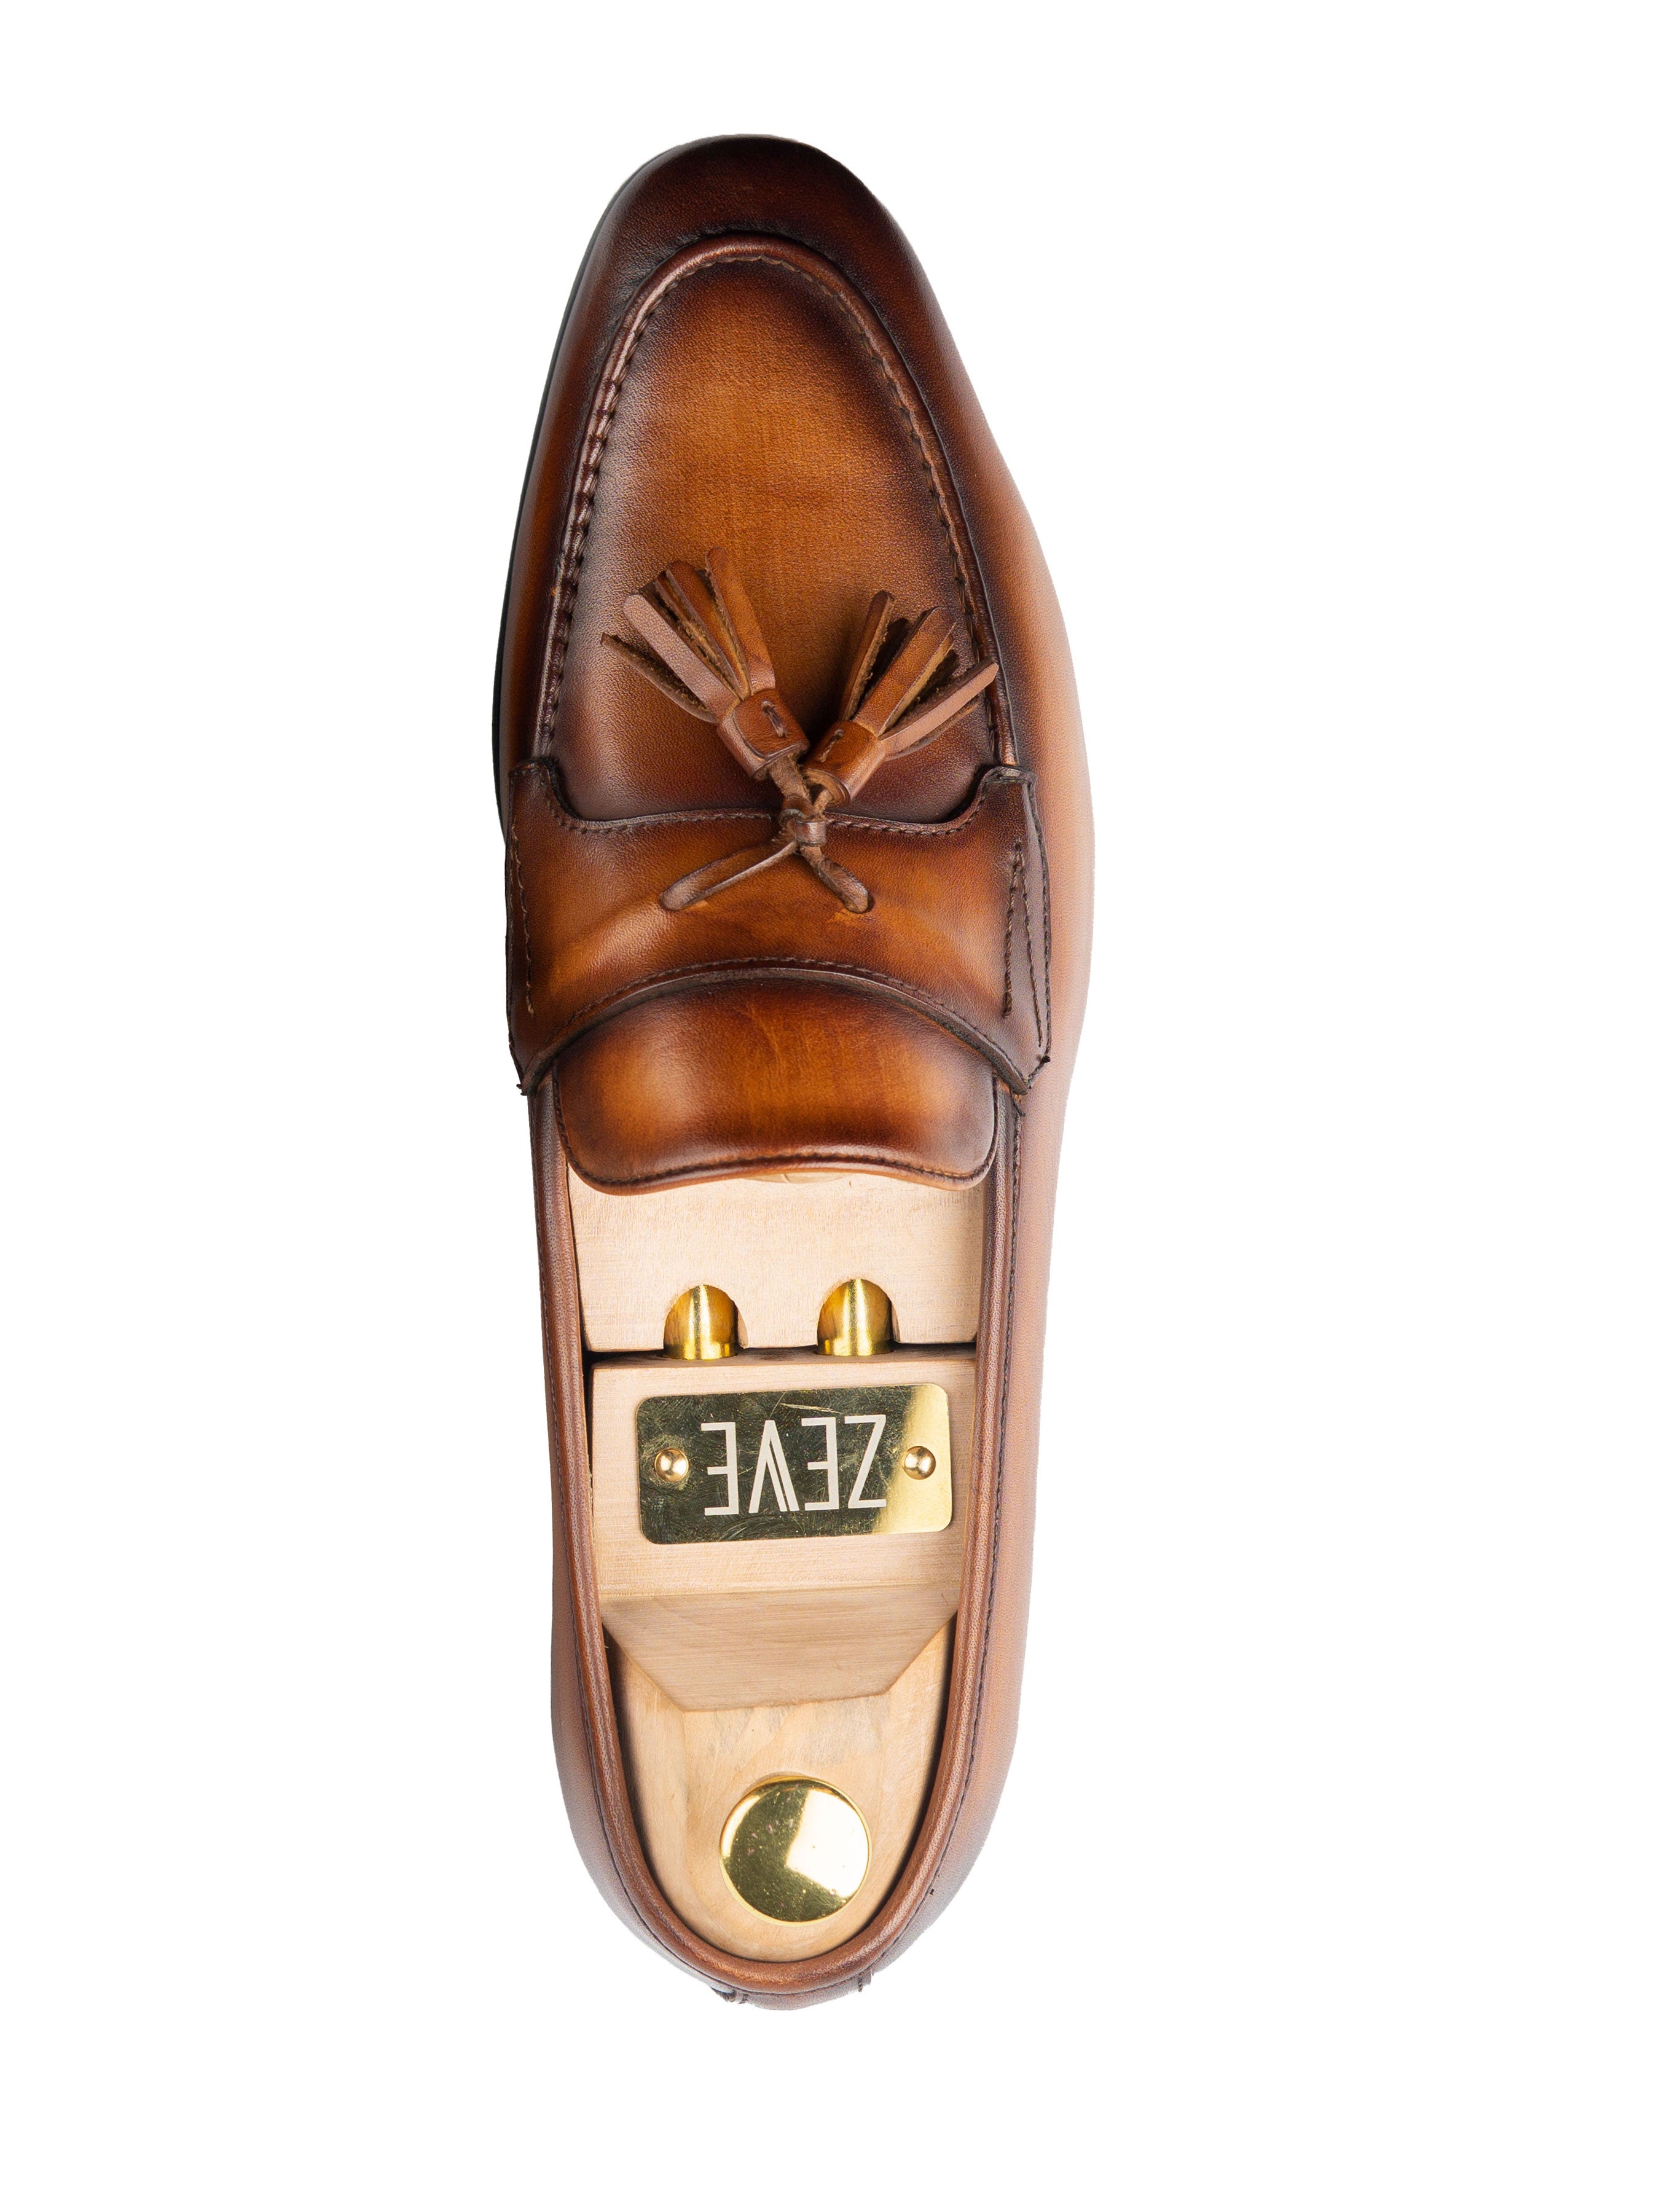 Tassel Loafer Wing Strap - Cognac Tan (Hand Painted Patina) - Zeve Shoes